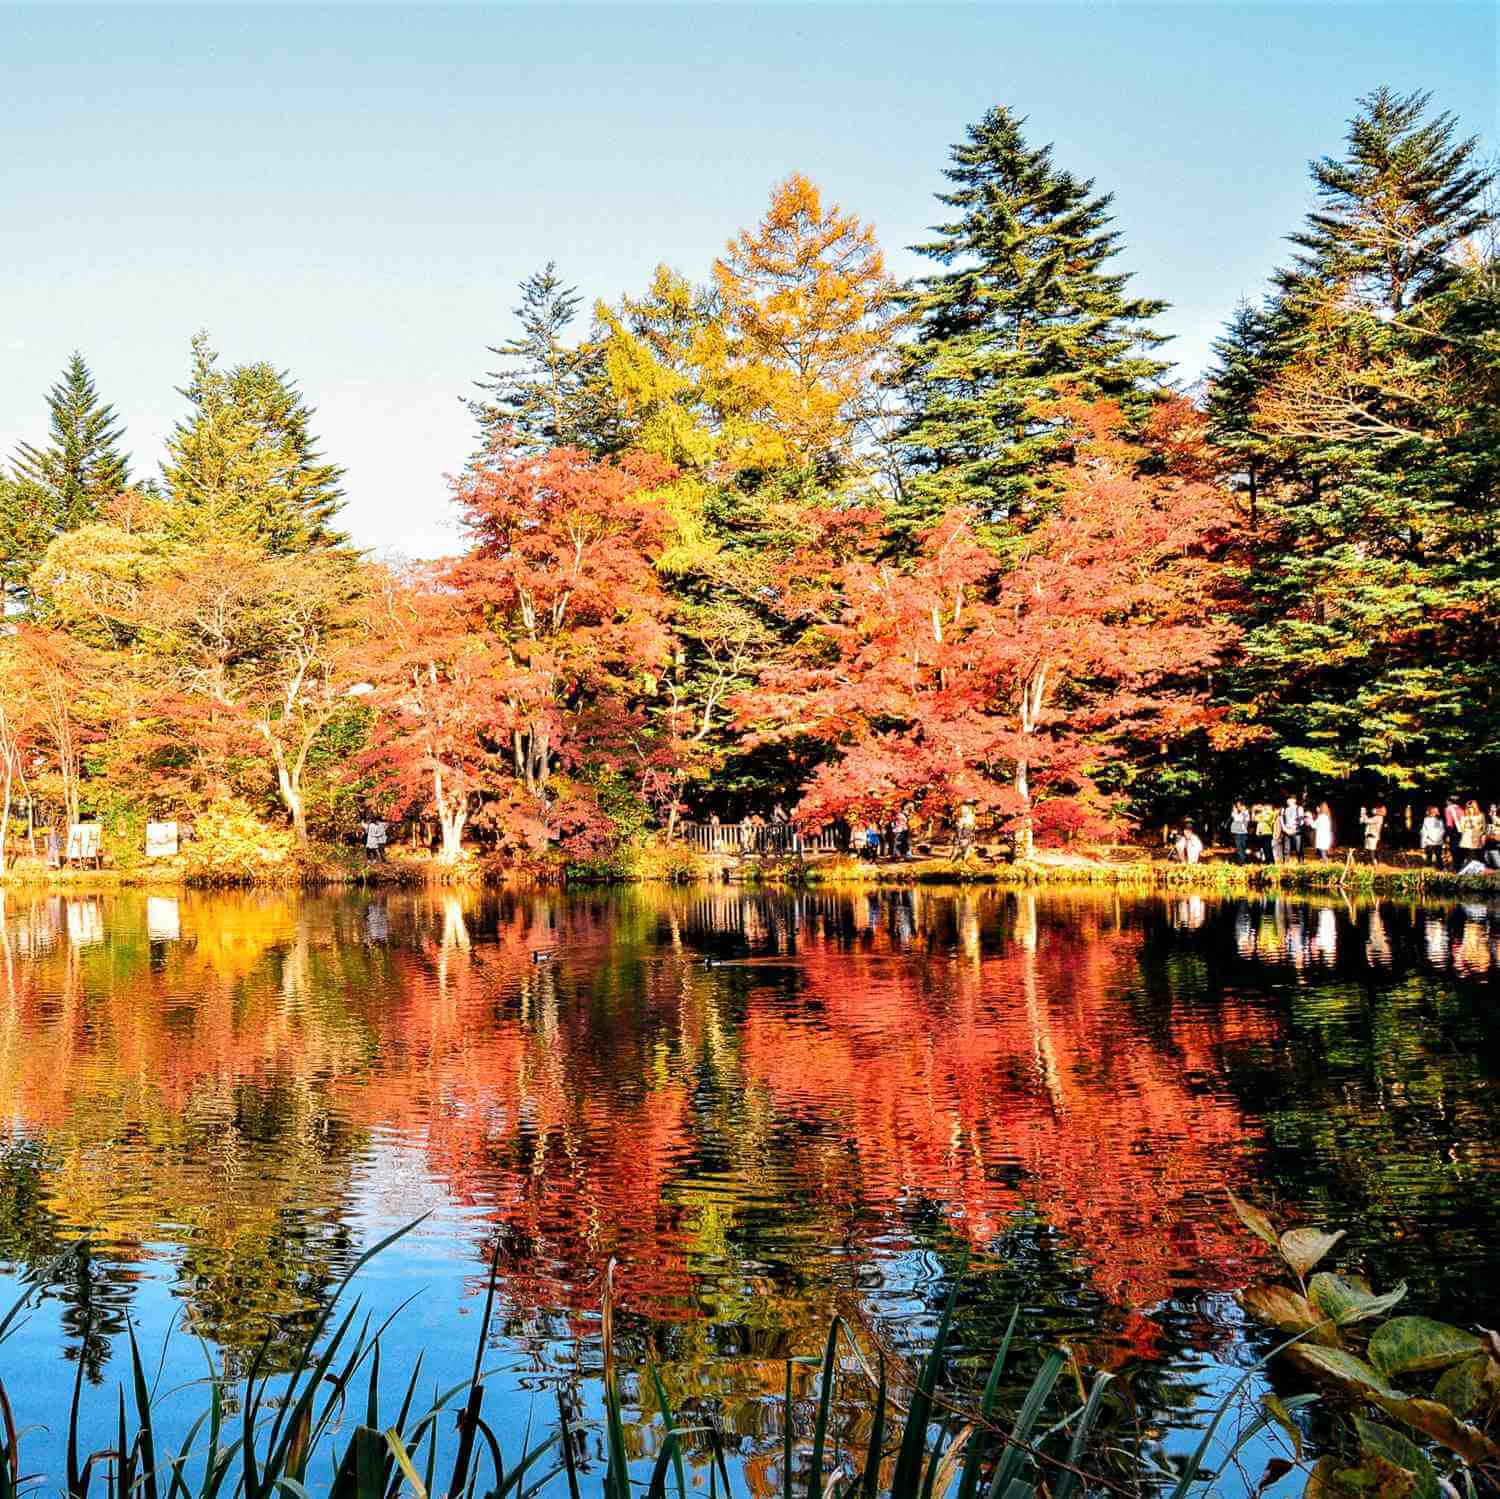 Kumobaike Pond is famous for its beautiful autumn colors = Shutterstock